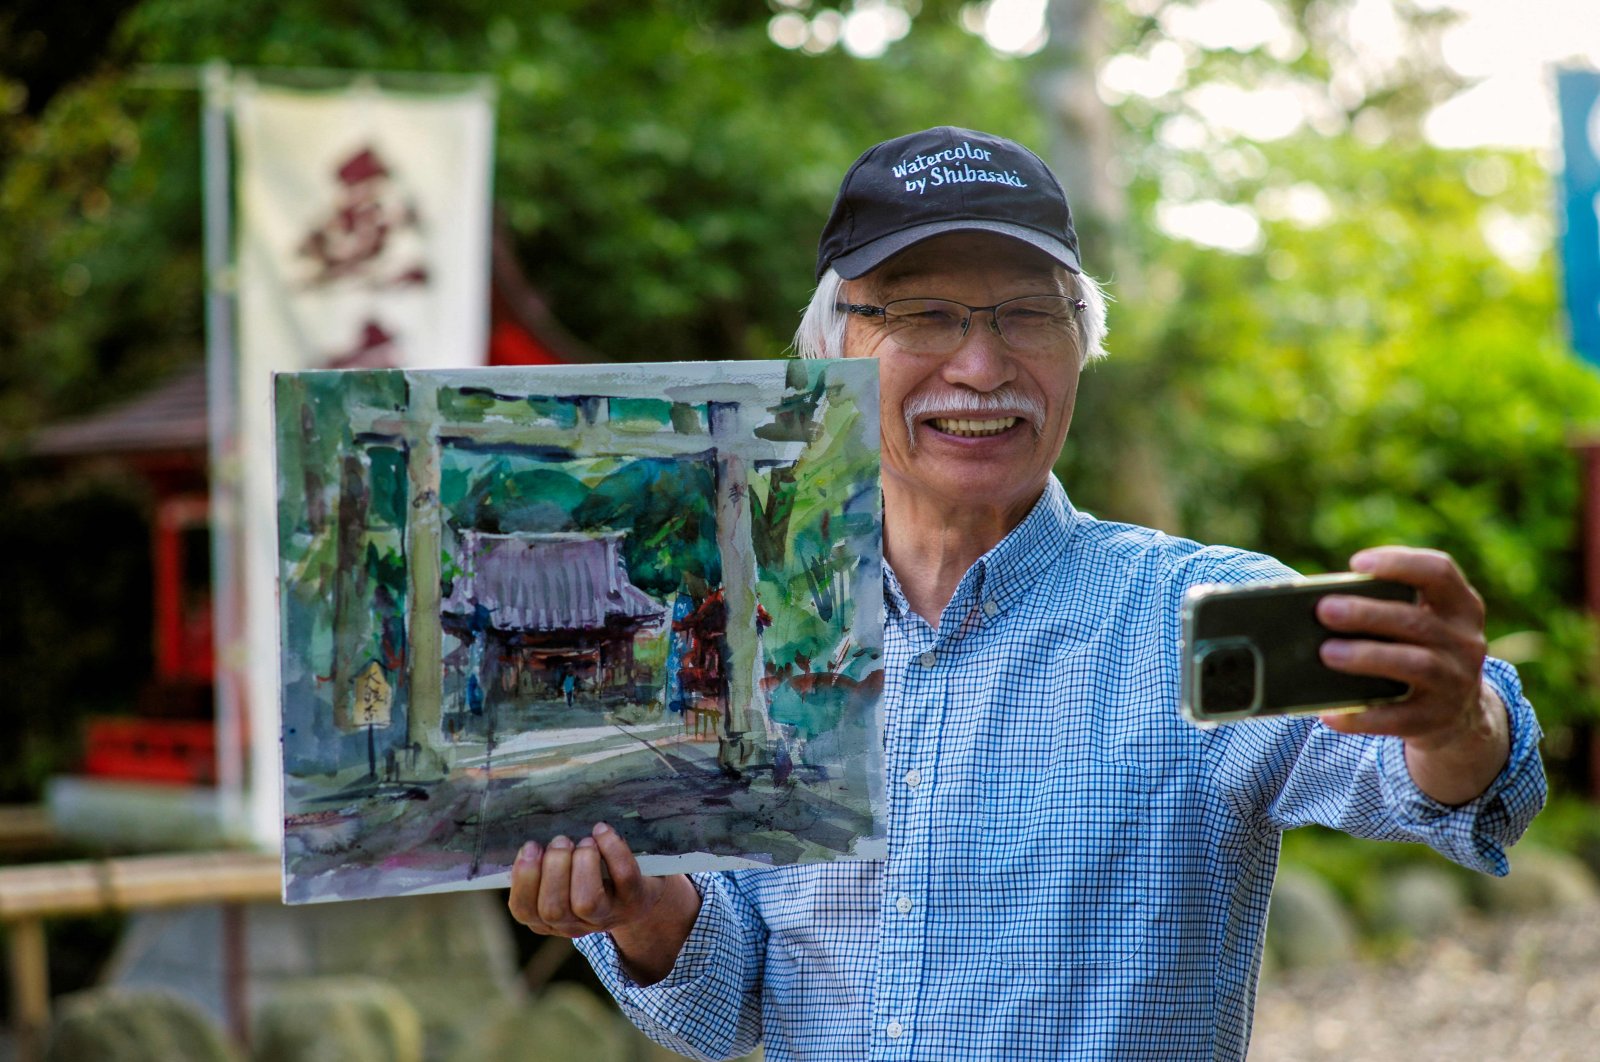 Japanese art instructor Harumichi Shibasaki poses with his finished watercolor painting while holding up his phone at a shrine in Isumi, Chiba prefecture, Japan, May 25, 2022. (AFP)